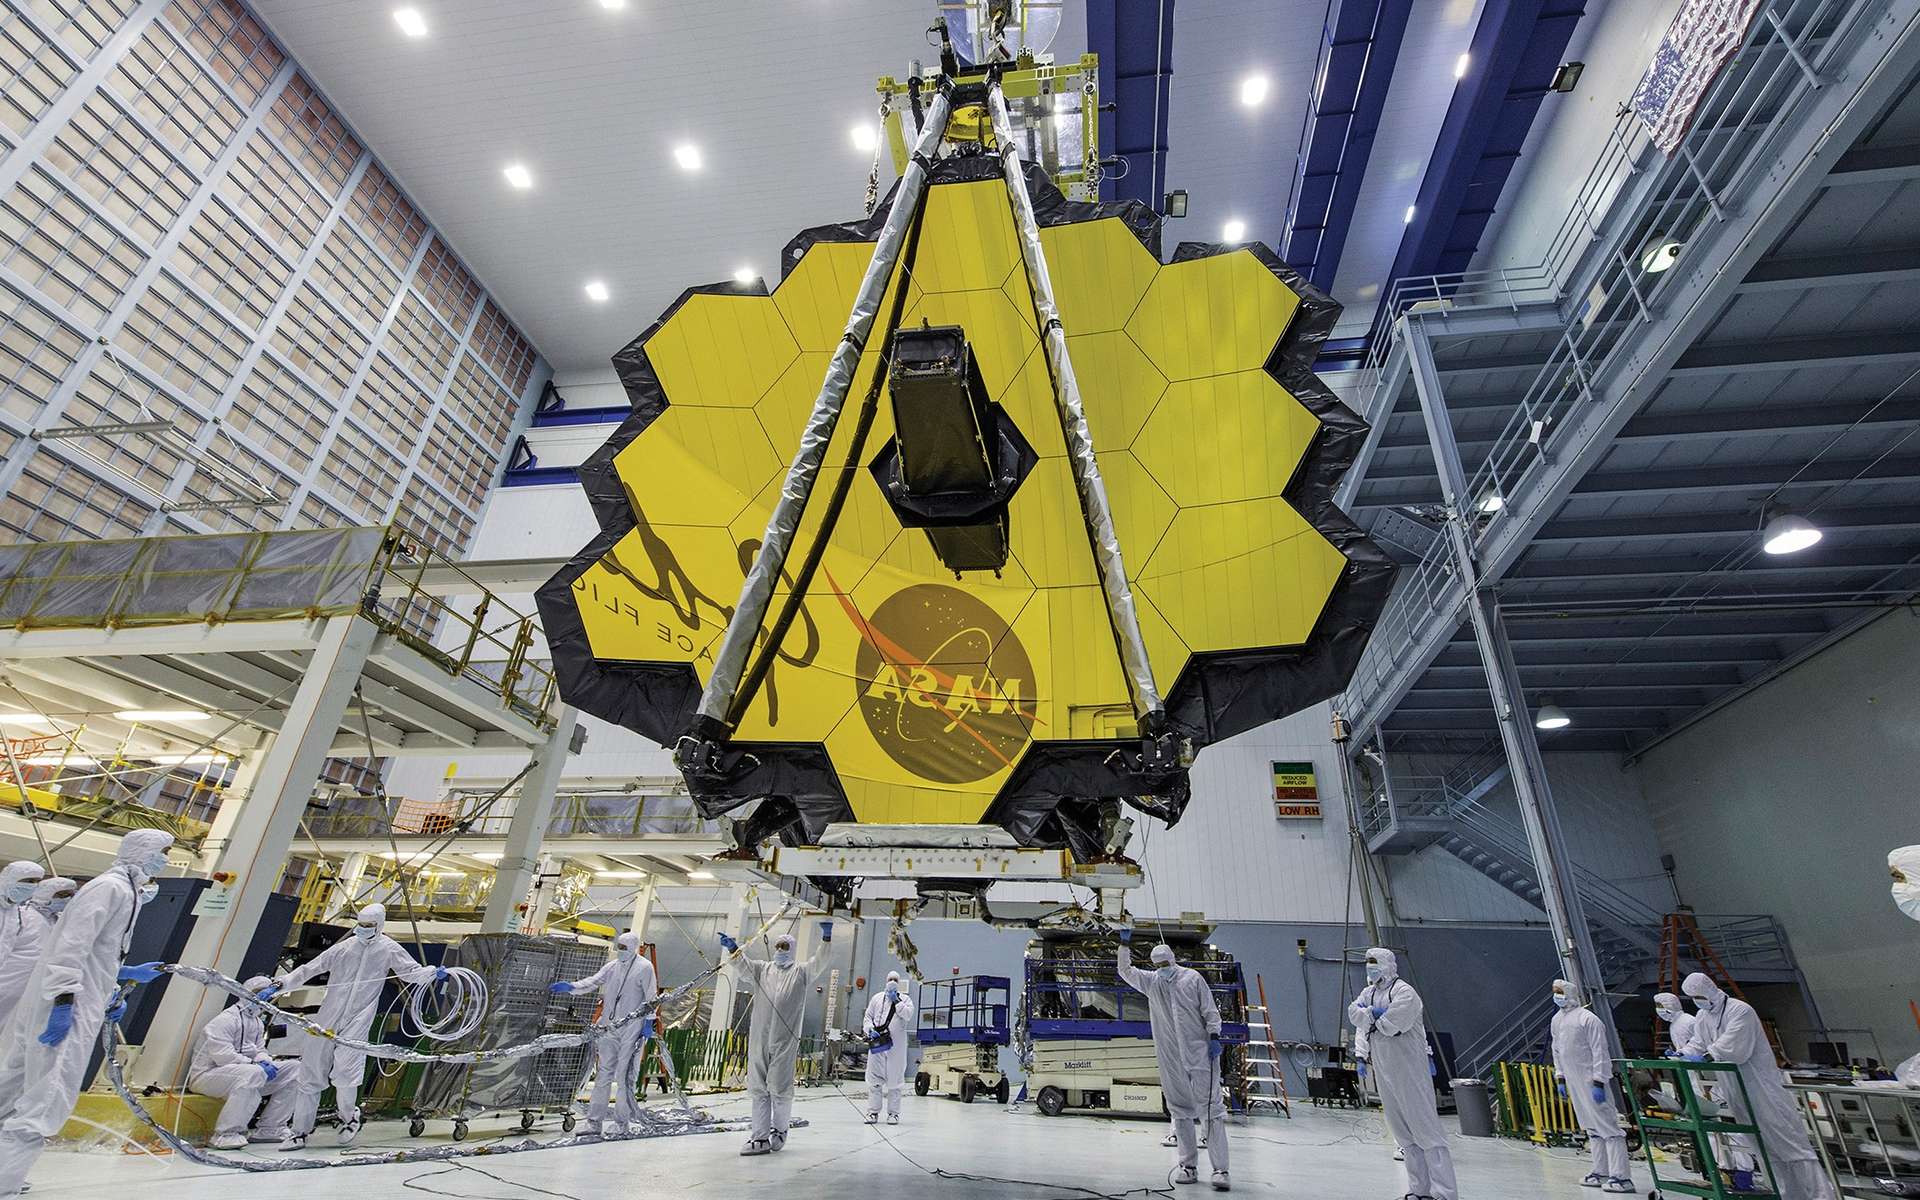 Live the evening of March 17th on the largest space telescope ever sent into space